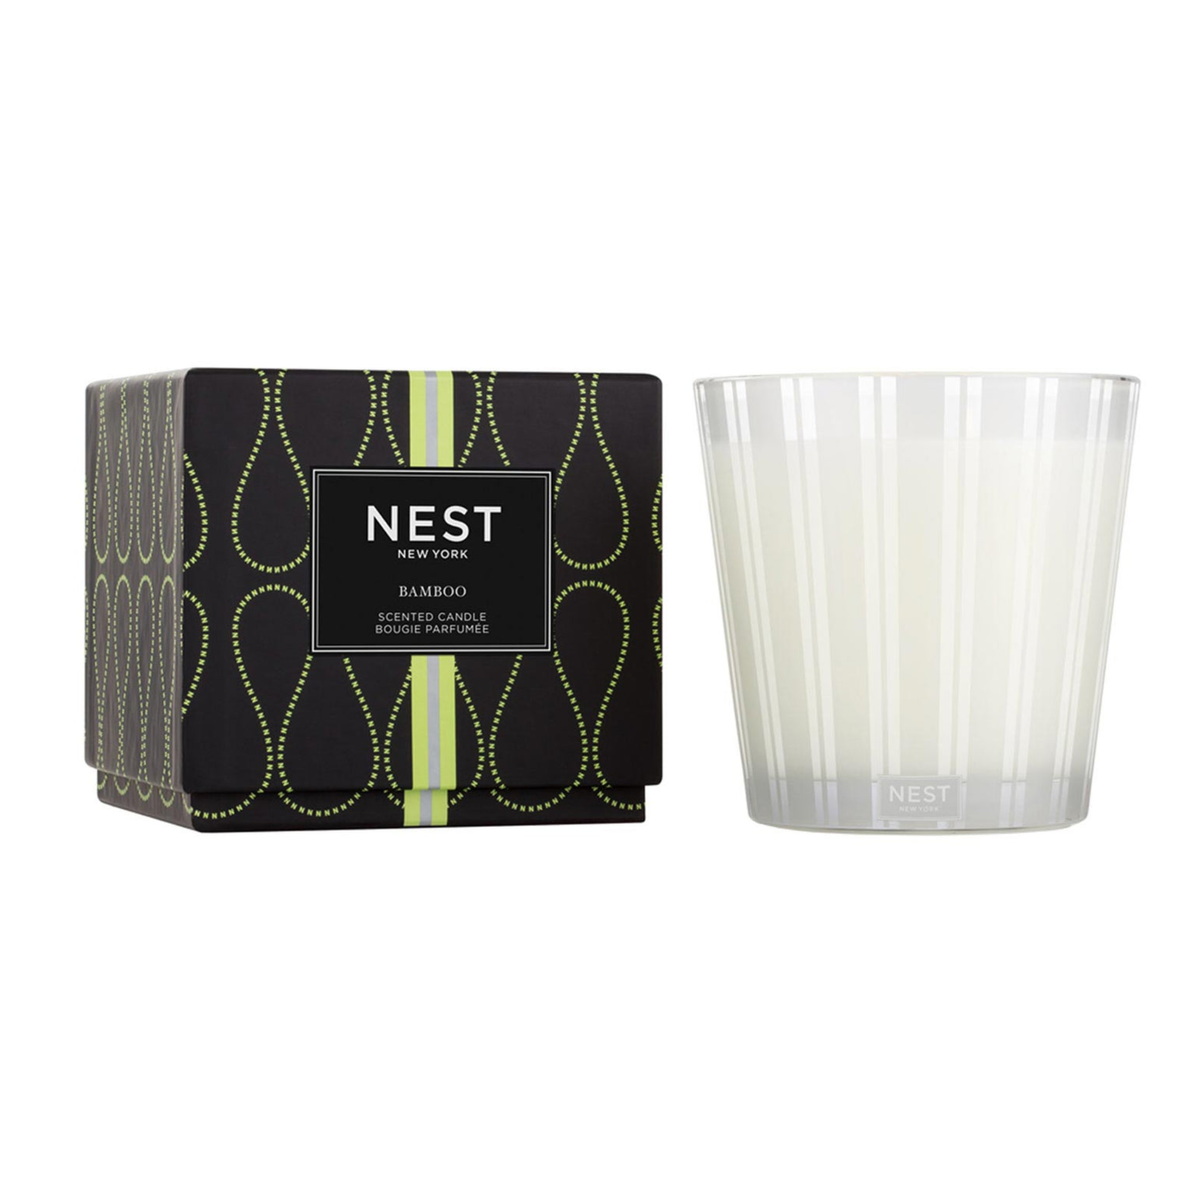 Product Image of Nest New York’s Bamboo 3-Wick Candle with Box